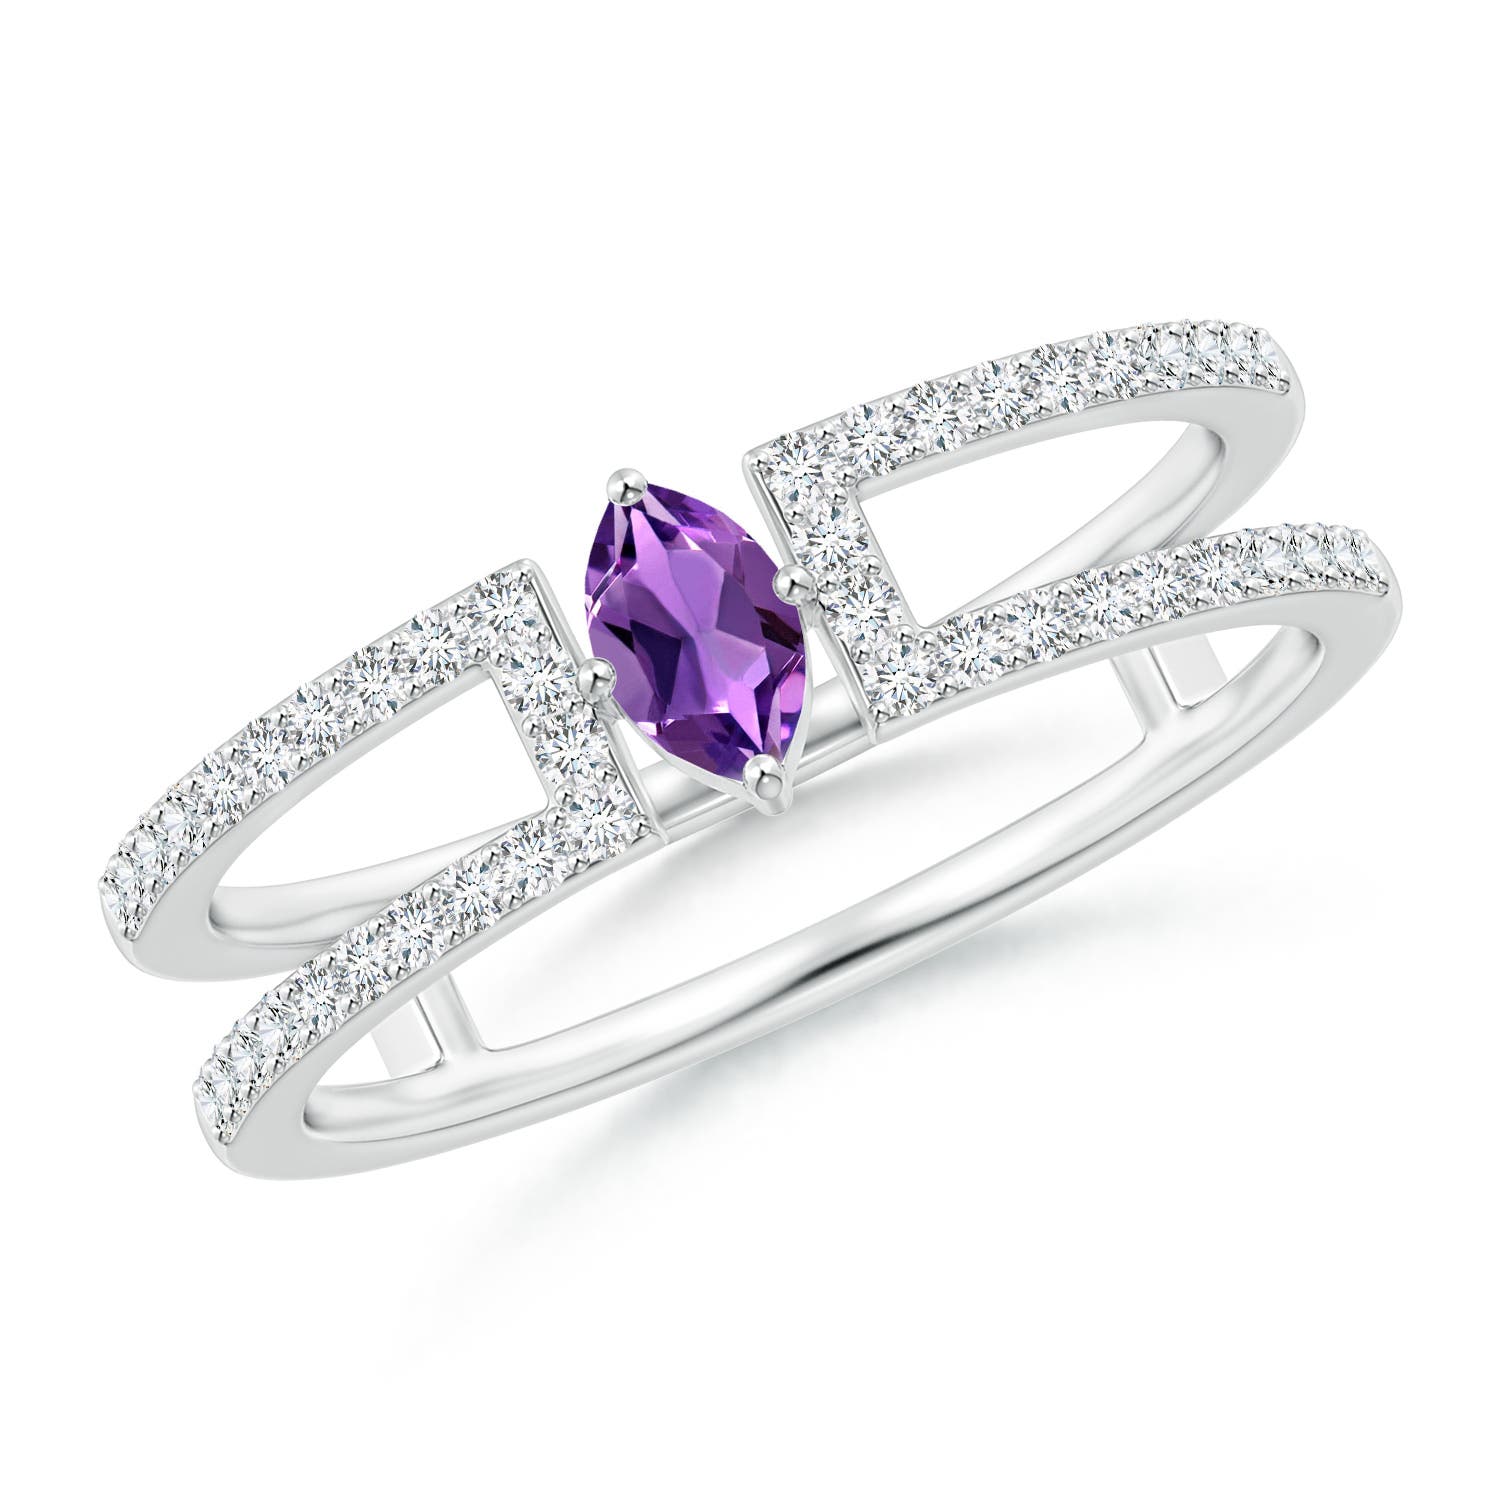 AAA - Amethyst / 0.44 CT / 14 KT White Gold